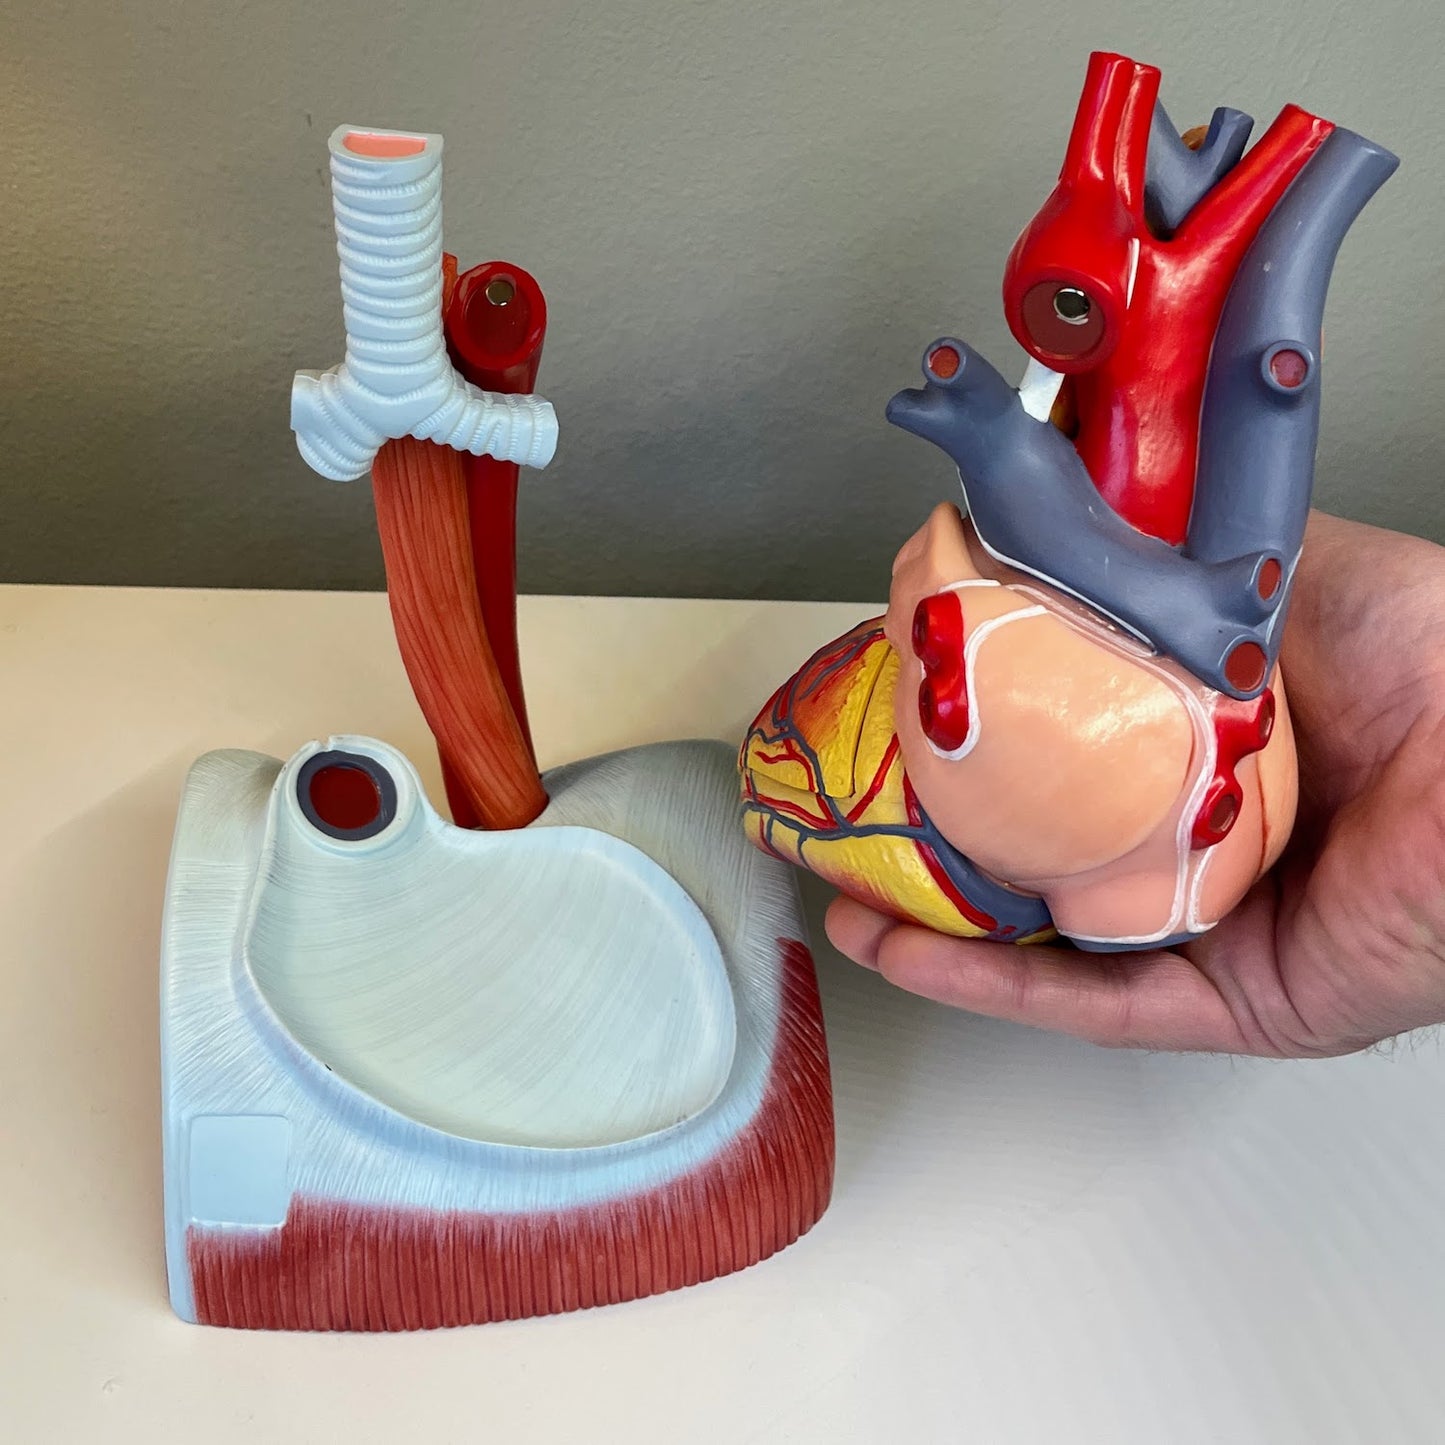 Enlarged heart model in high quality and 12 parts